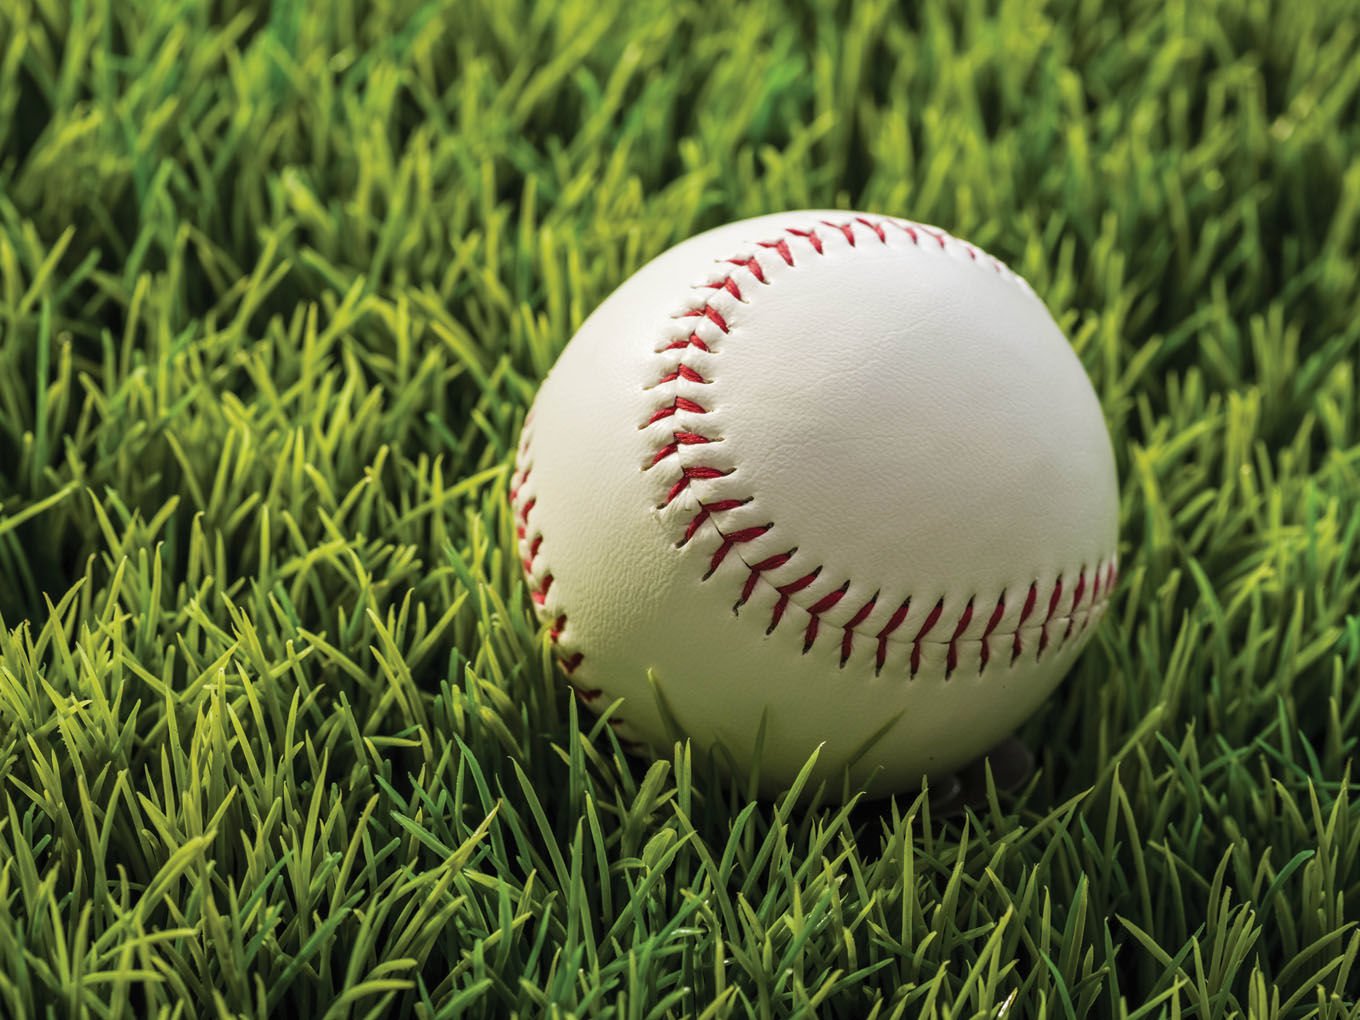 Allegany Baseball Triumphs Over Musselman After Easter Tournament Setback